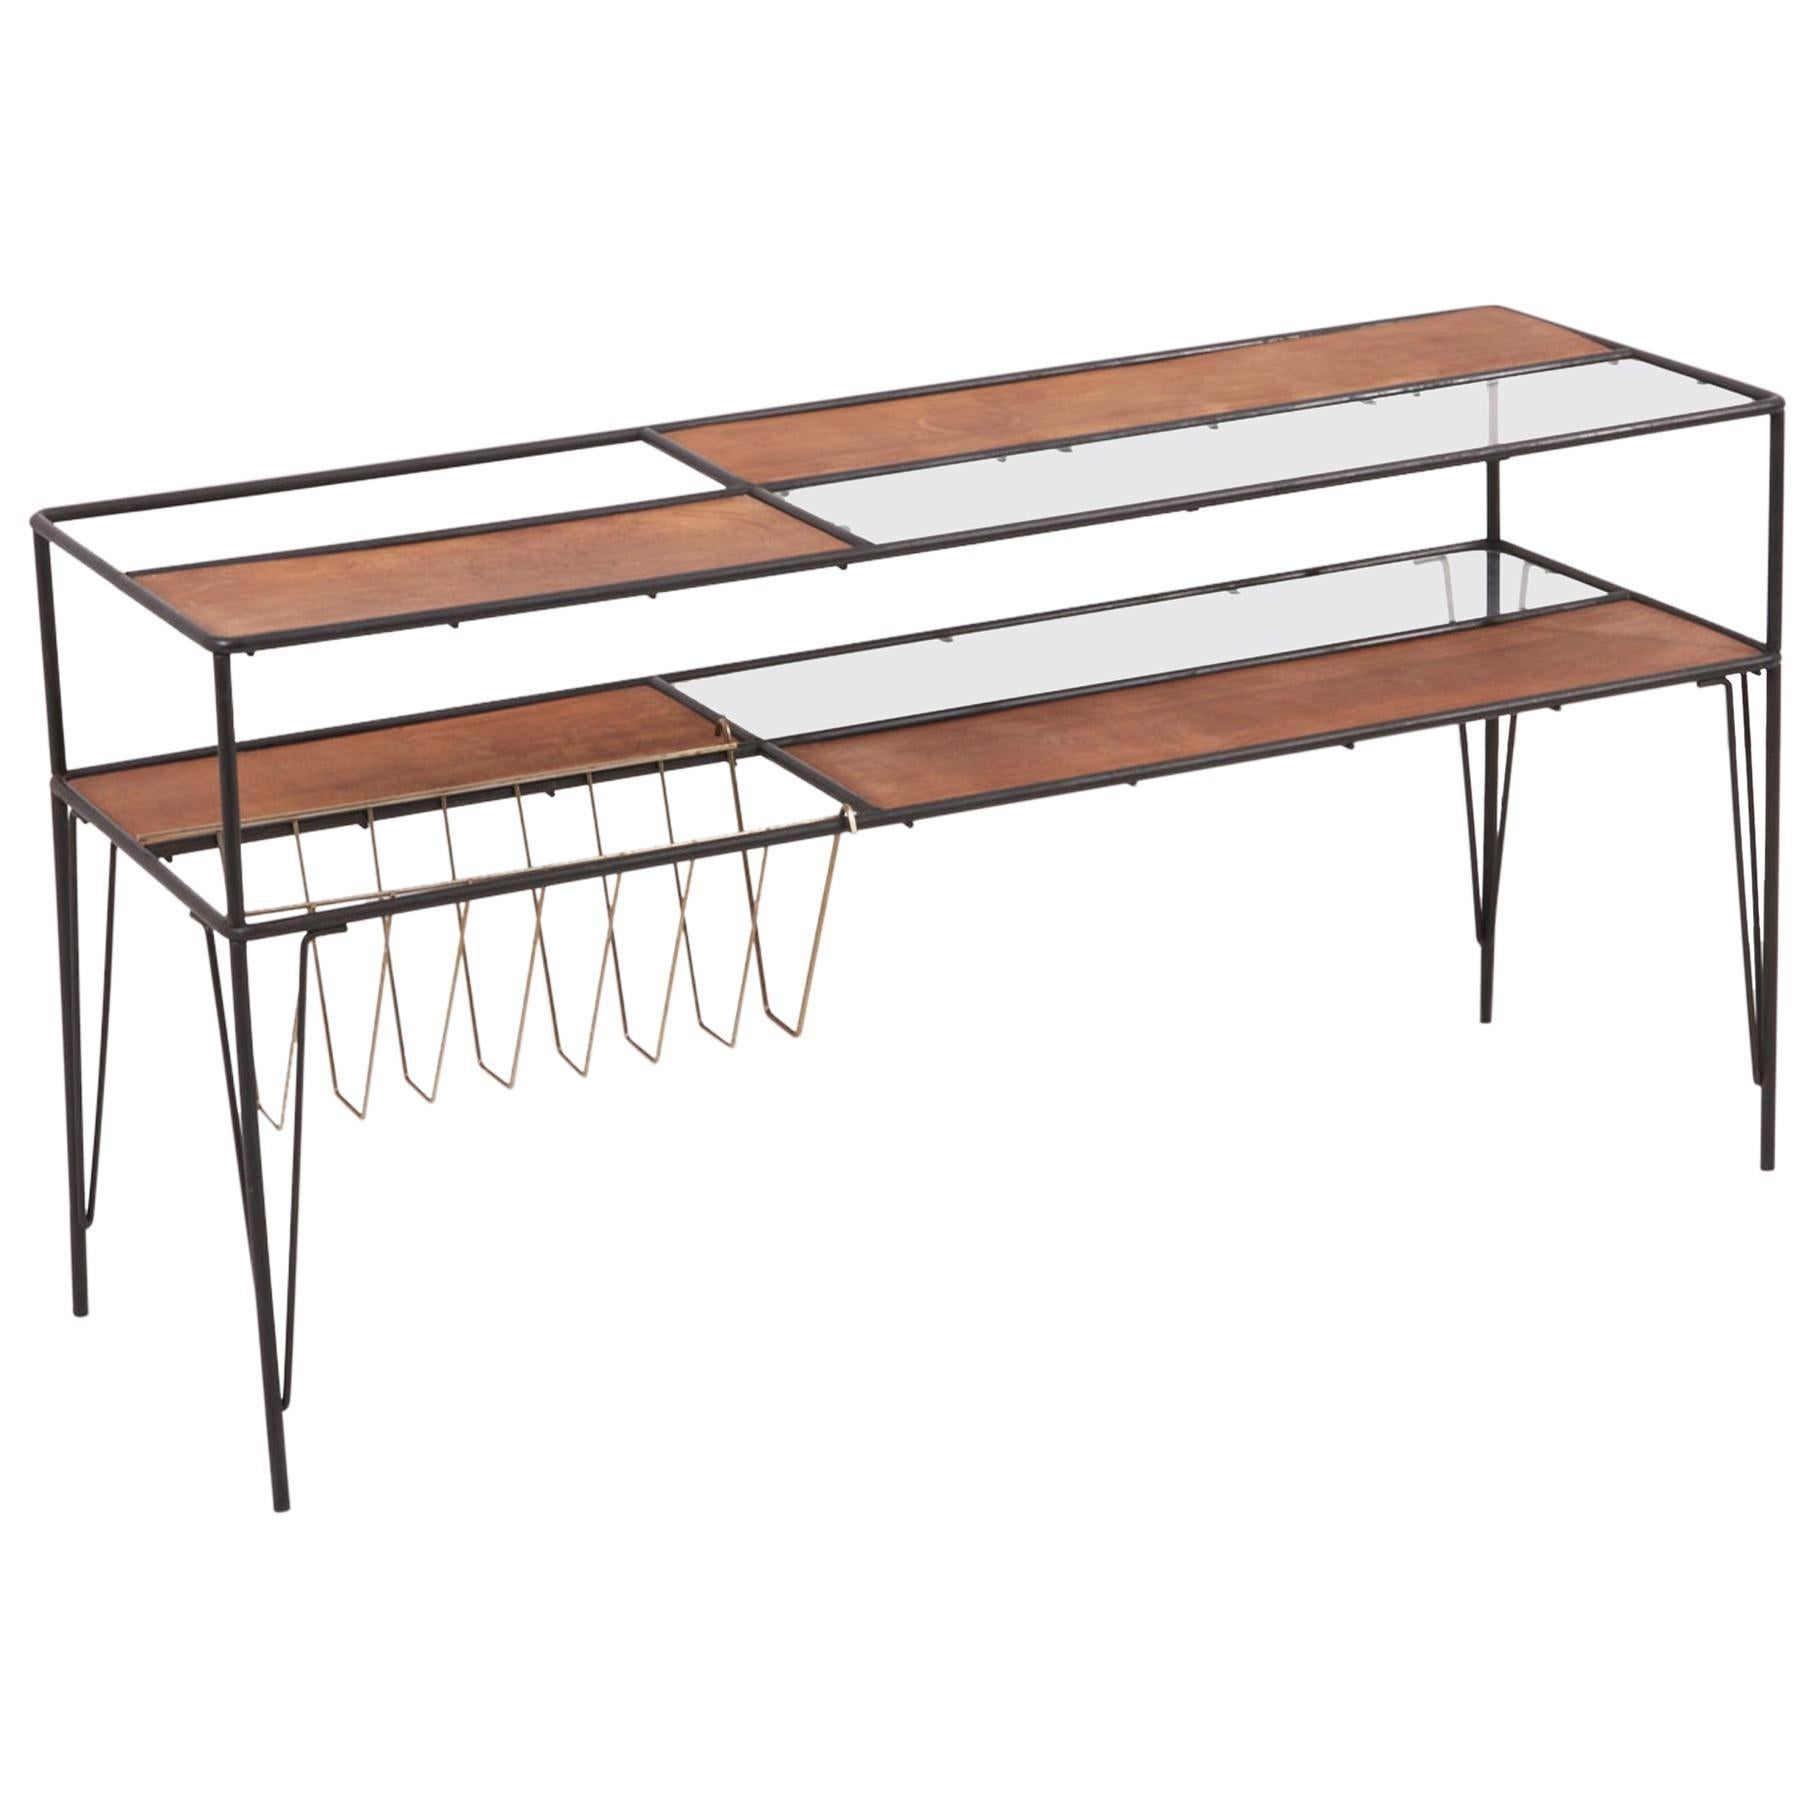 Modernist Magazine Rack or Side Coffee Table in Metal, Wood and Glass, US 1950s For Sale